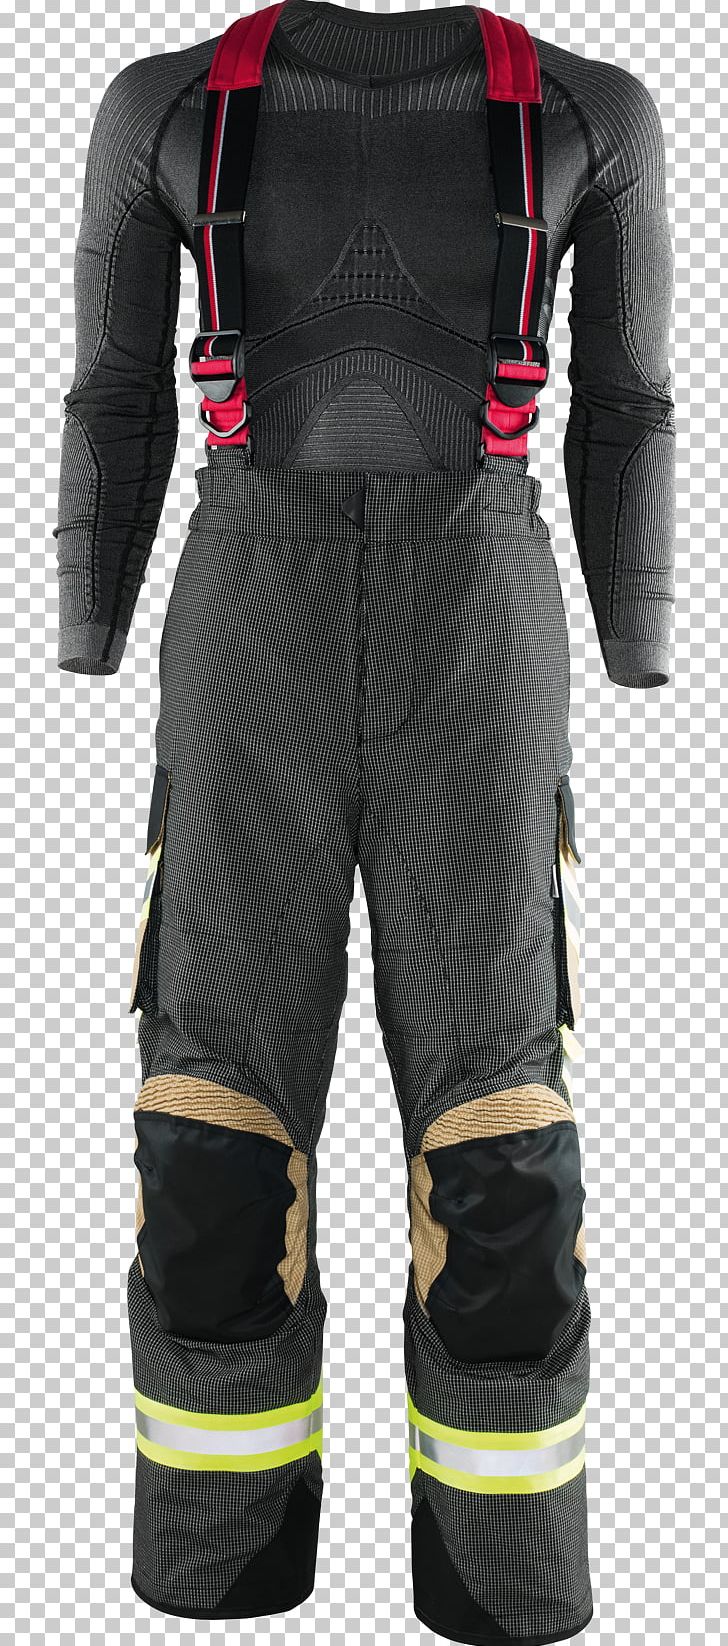 Firefighter Fire Department Jacket Clothing PNG, Clipart, Clothing, En 469, Fire, Fire Department, Firefighter Free PNG Download